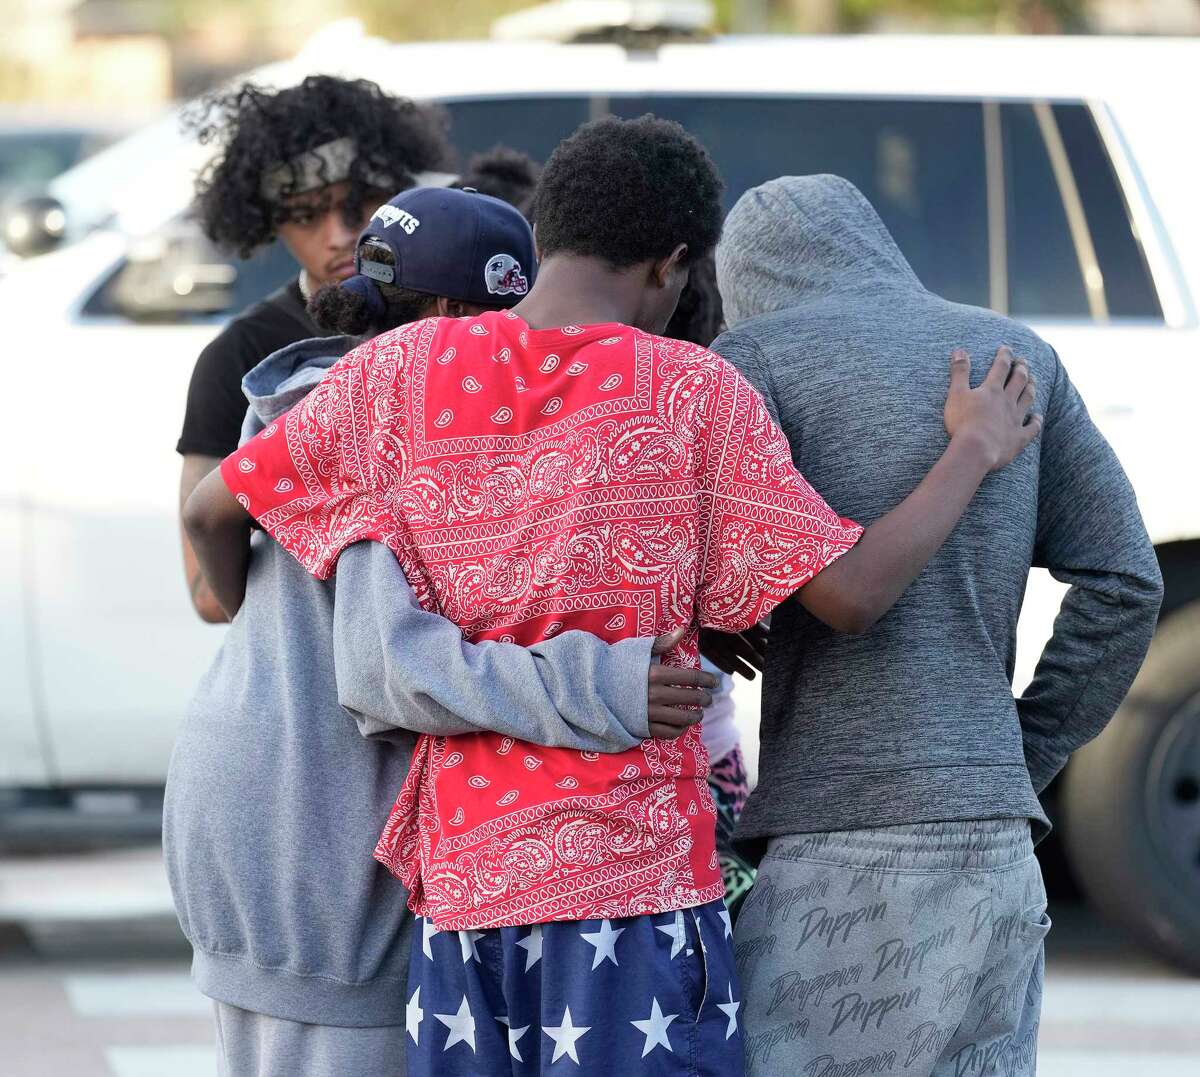 Tareka Lockhart’s family hugs each other after news of one of her son’s death after a shooting as Harris County Sheriff department investigated the scene where four people were shot and three killed at 4800 Park Square Lane on Friday, Dec. 30, 2022 in Humble.